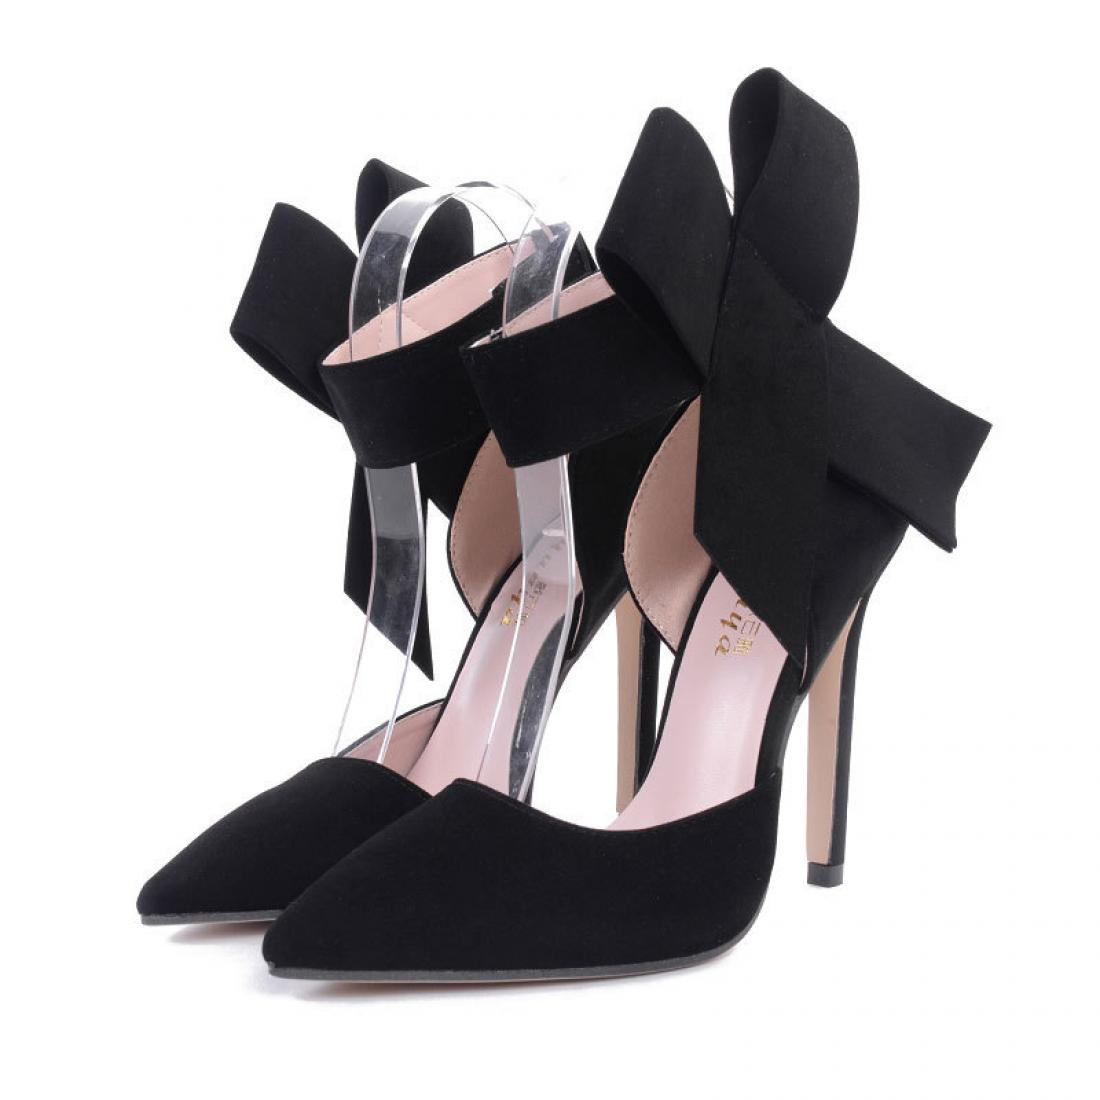 Black Suede Ankle Giant Bow Stiletto High Heels Sandals Shoes ...